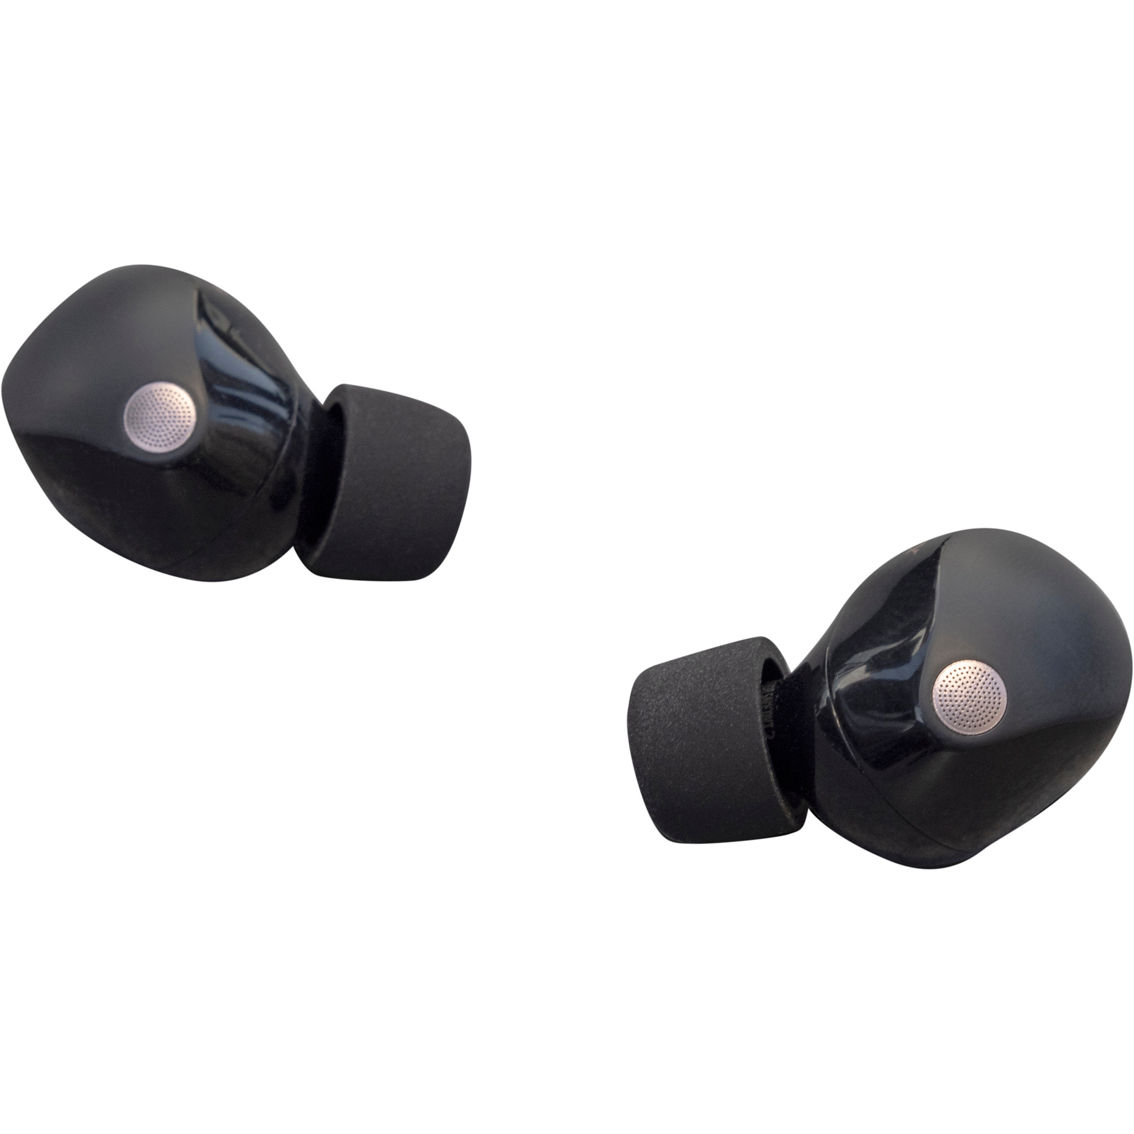 Sony The Best Truly Wireless Noise Canceling Earbuds, Black